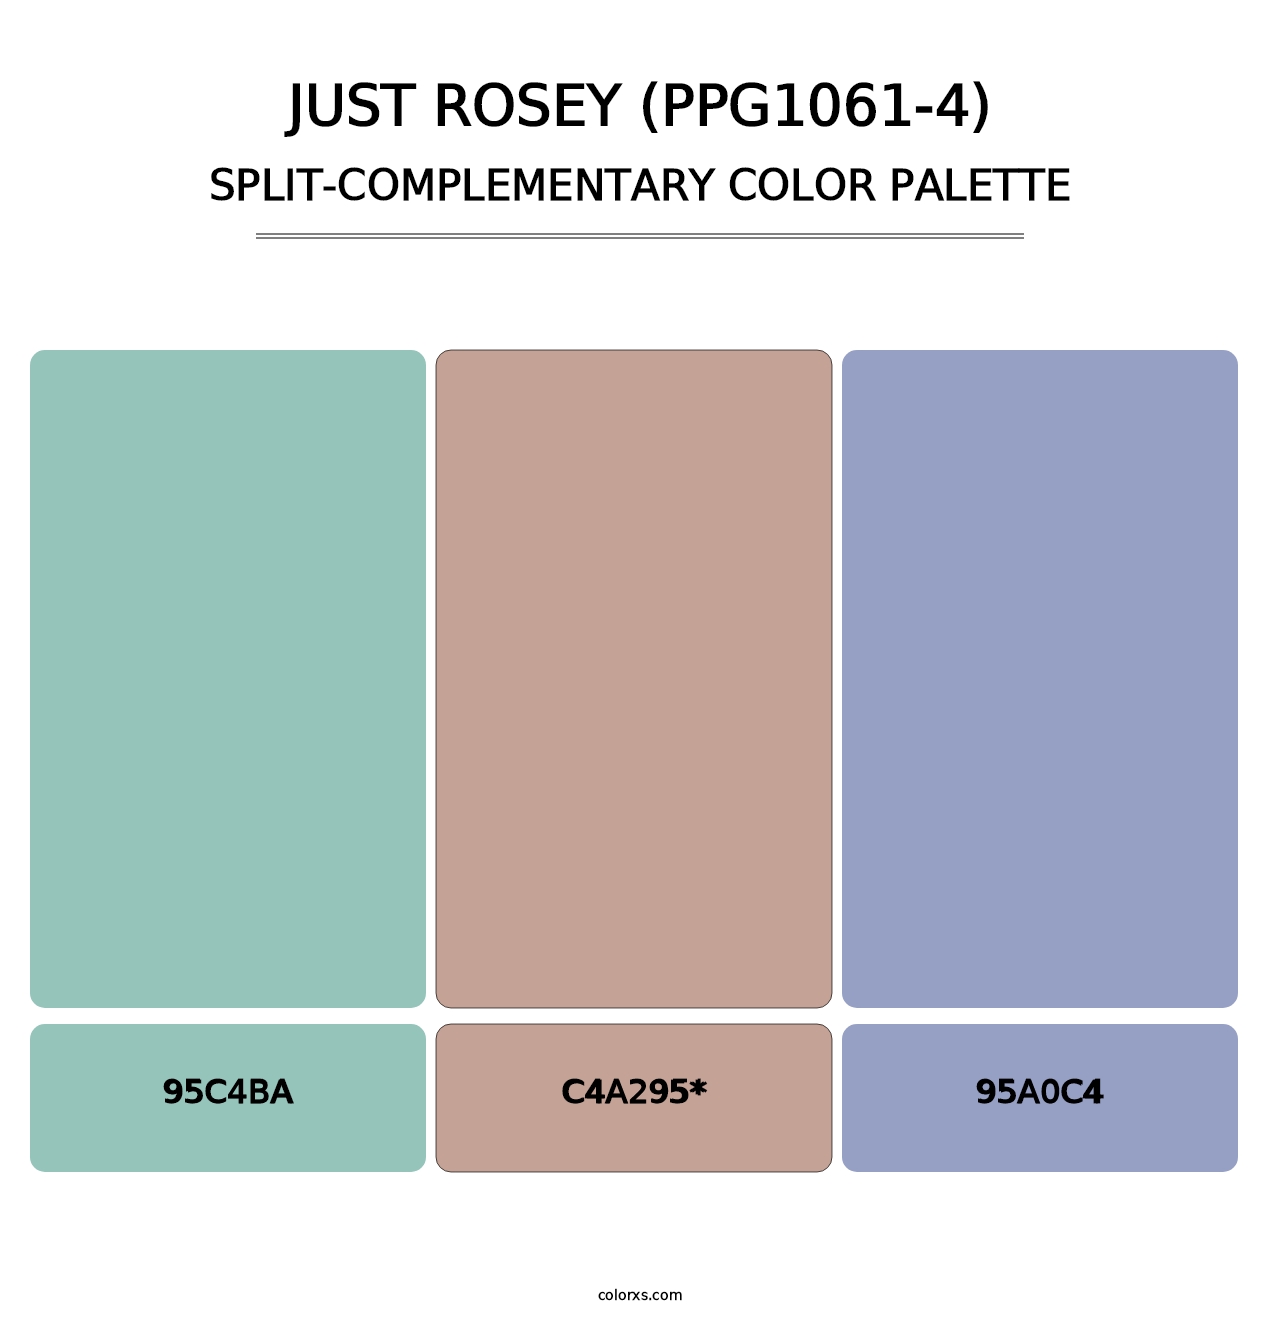 Just Rosey (PPG1061-4) - Split-Complementary Color Palette